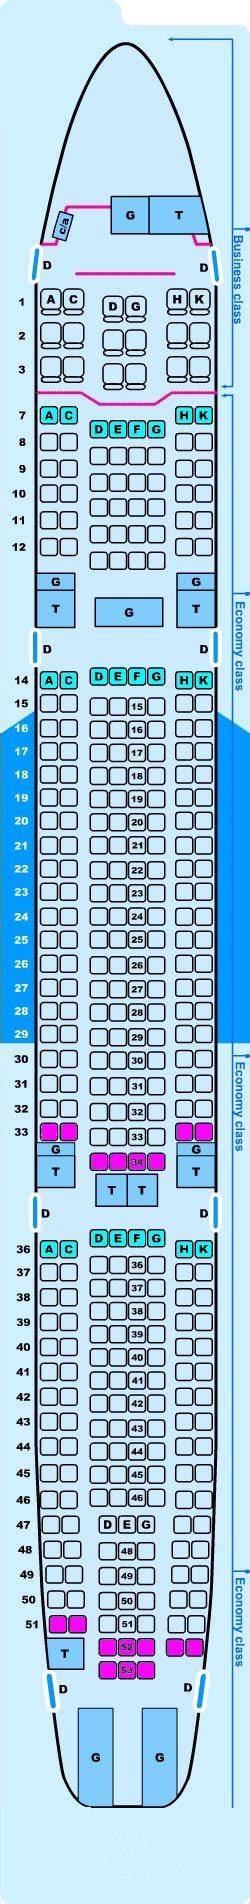 A330-300 airbus seating chart. The airline operates flights to various destinations across the globe with more than 230 fleets. Qatar operates a total of 7 Airbus A330-300 aircraft. The seat map and configuration details are shown in the table below. Qatar Airbus A330-300 Seat Map. Qatar Airways A330-300 Seat Map (305 seats) FARE CLASSES. 